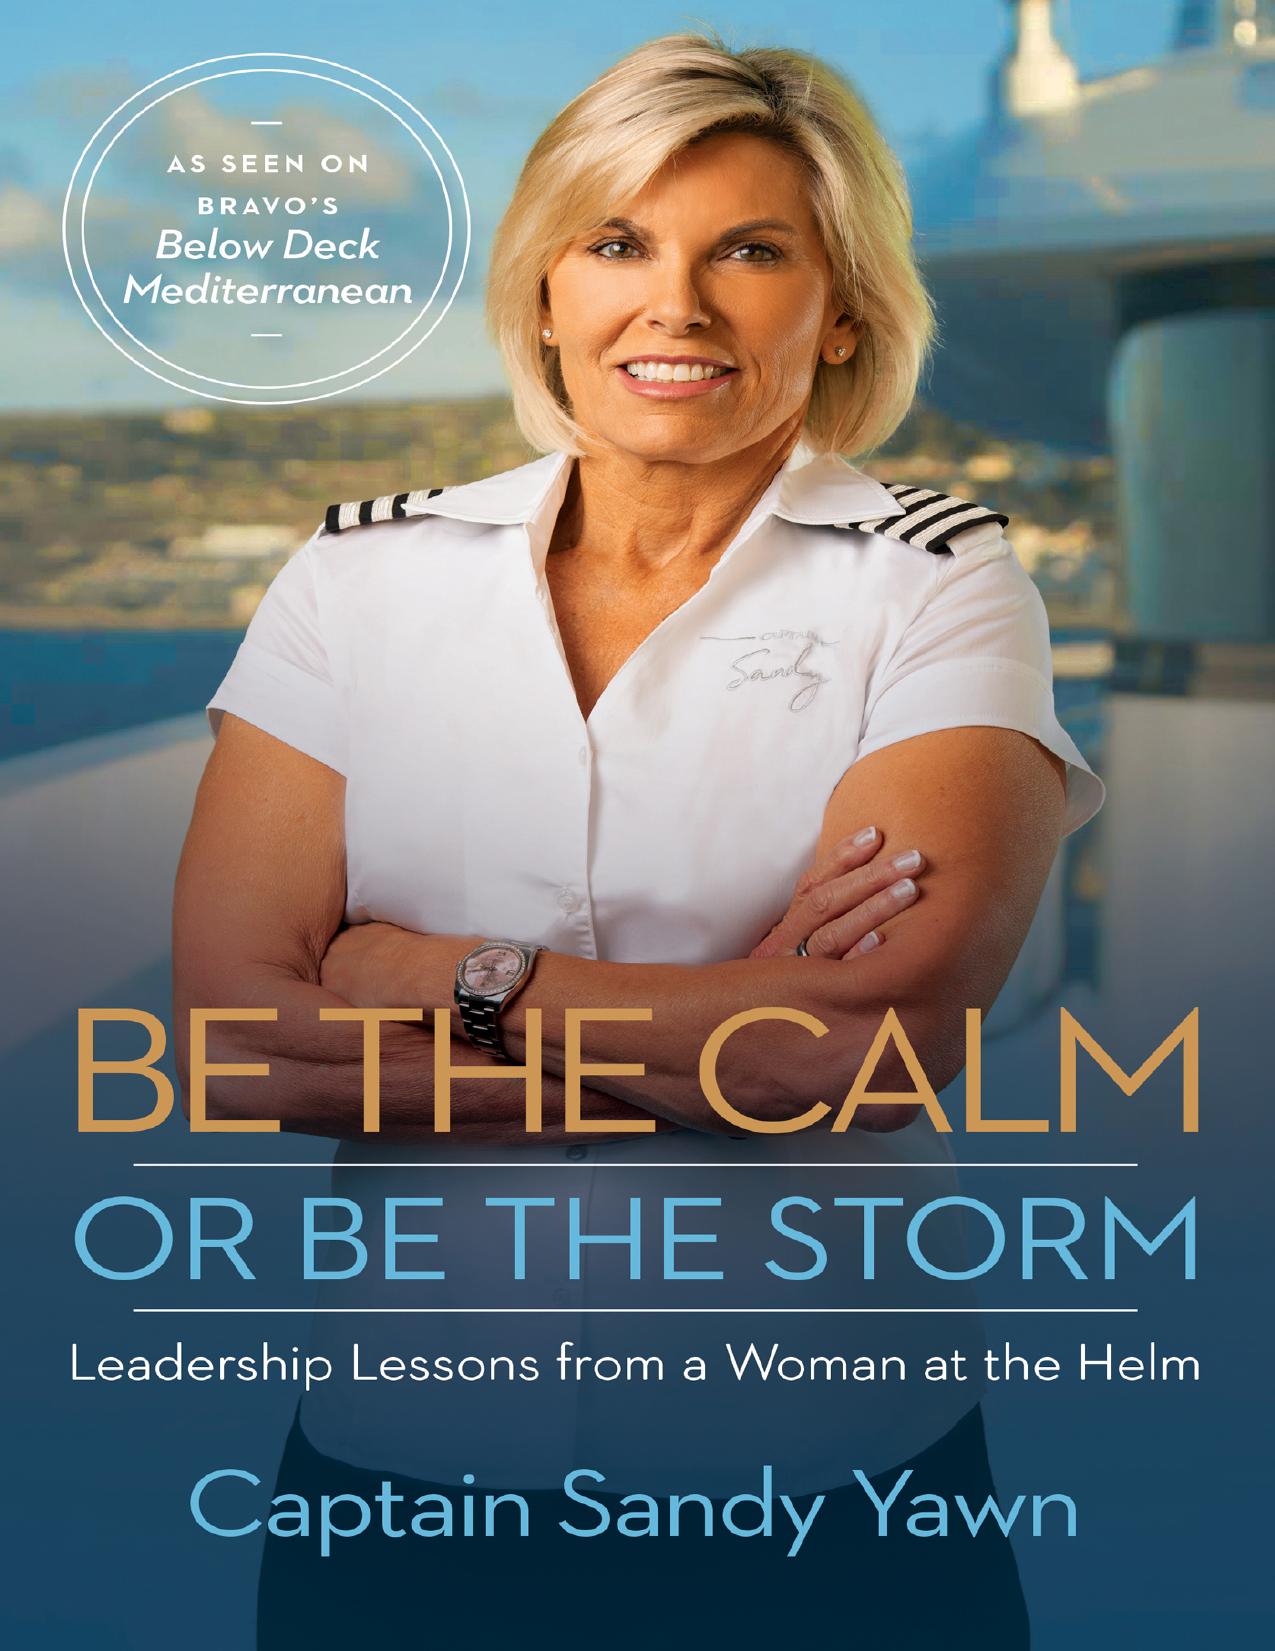 Be the Calm or Be the Storm: Leadership Lessons from a Woman at the Helm by Captain Sandy Yawn & Samantha Marshall